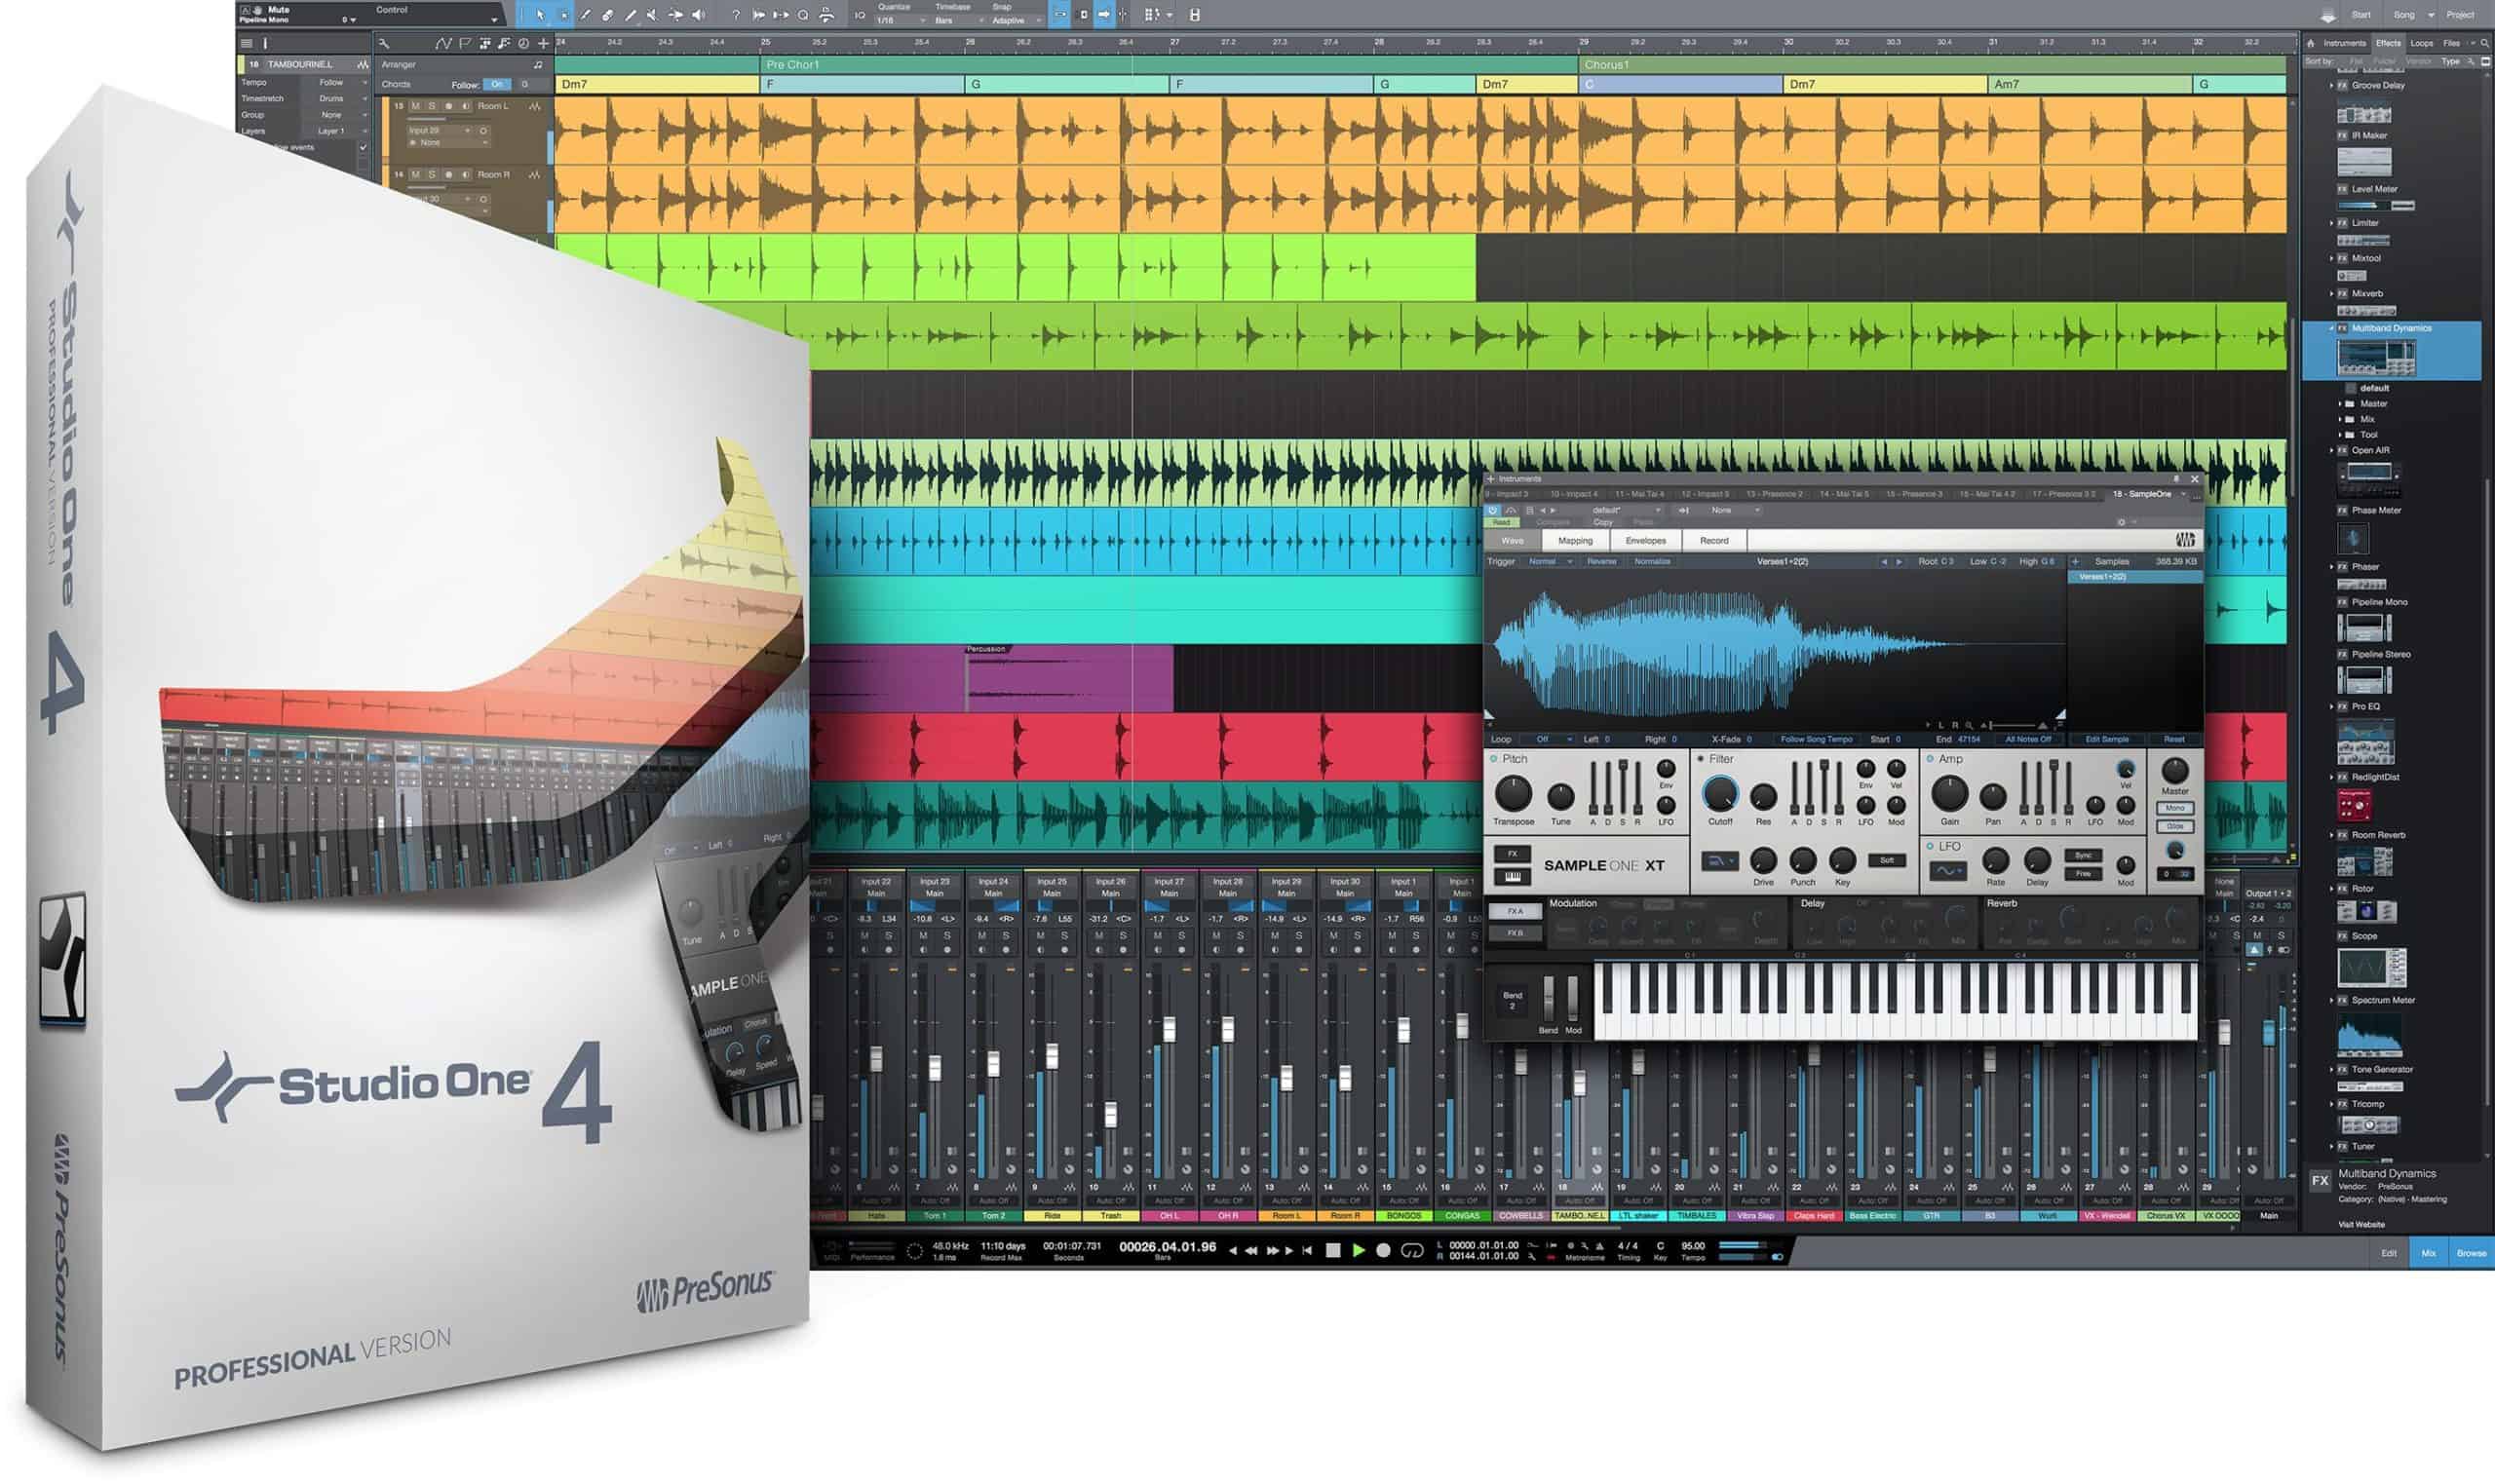 Studio One 4.6 Improves Ampire, Browser and Pattern Editor